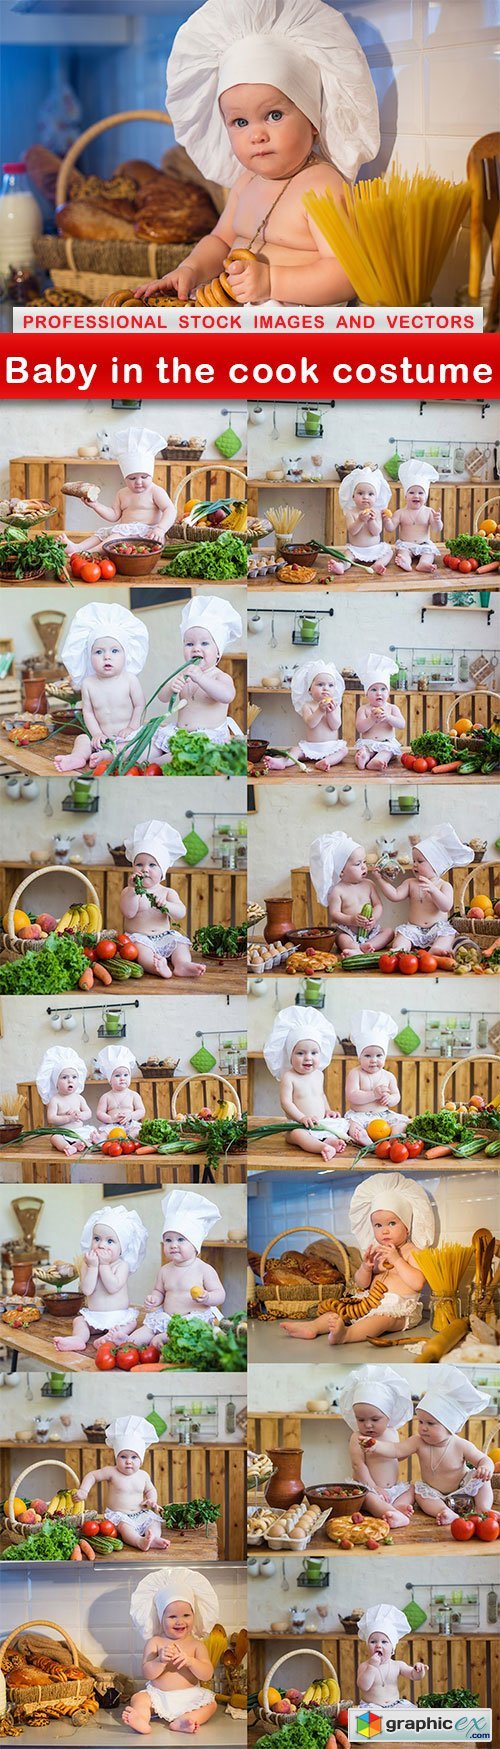 Baby in the cook costume - 15 UHQ JPEG